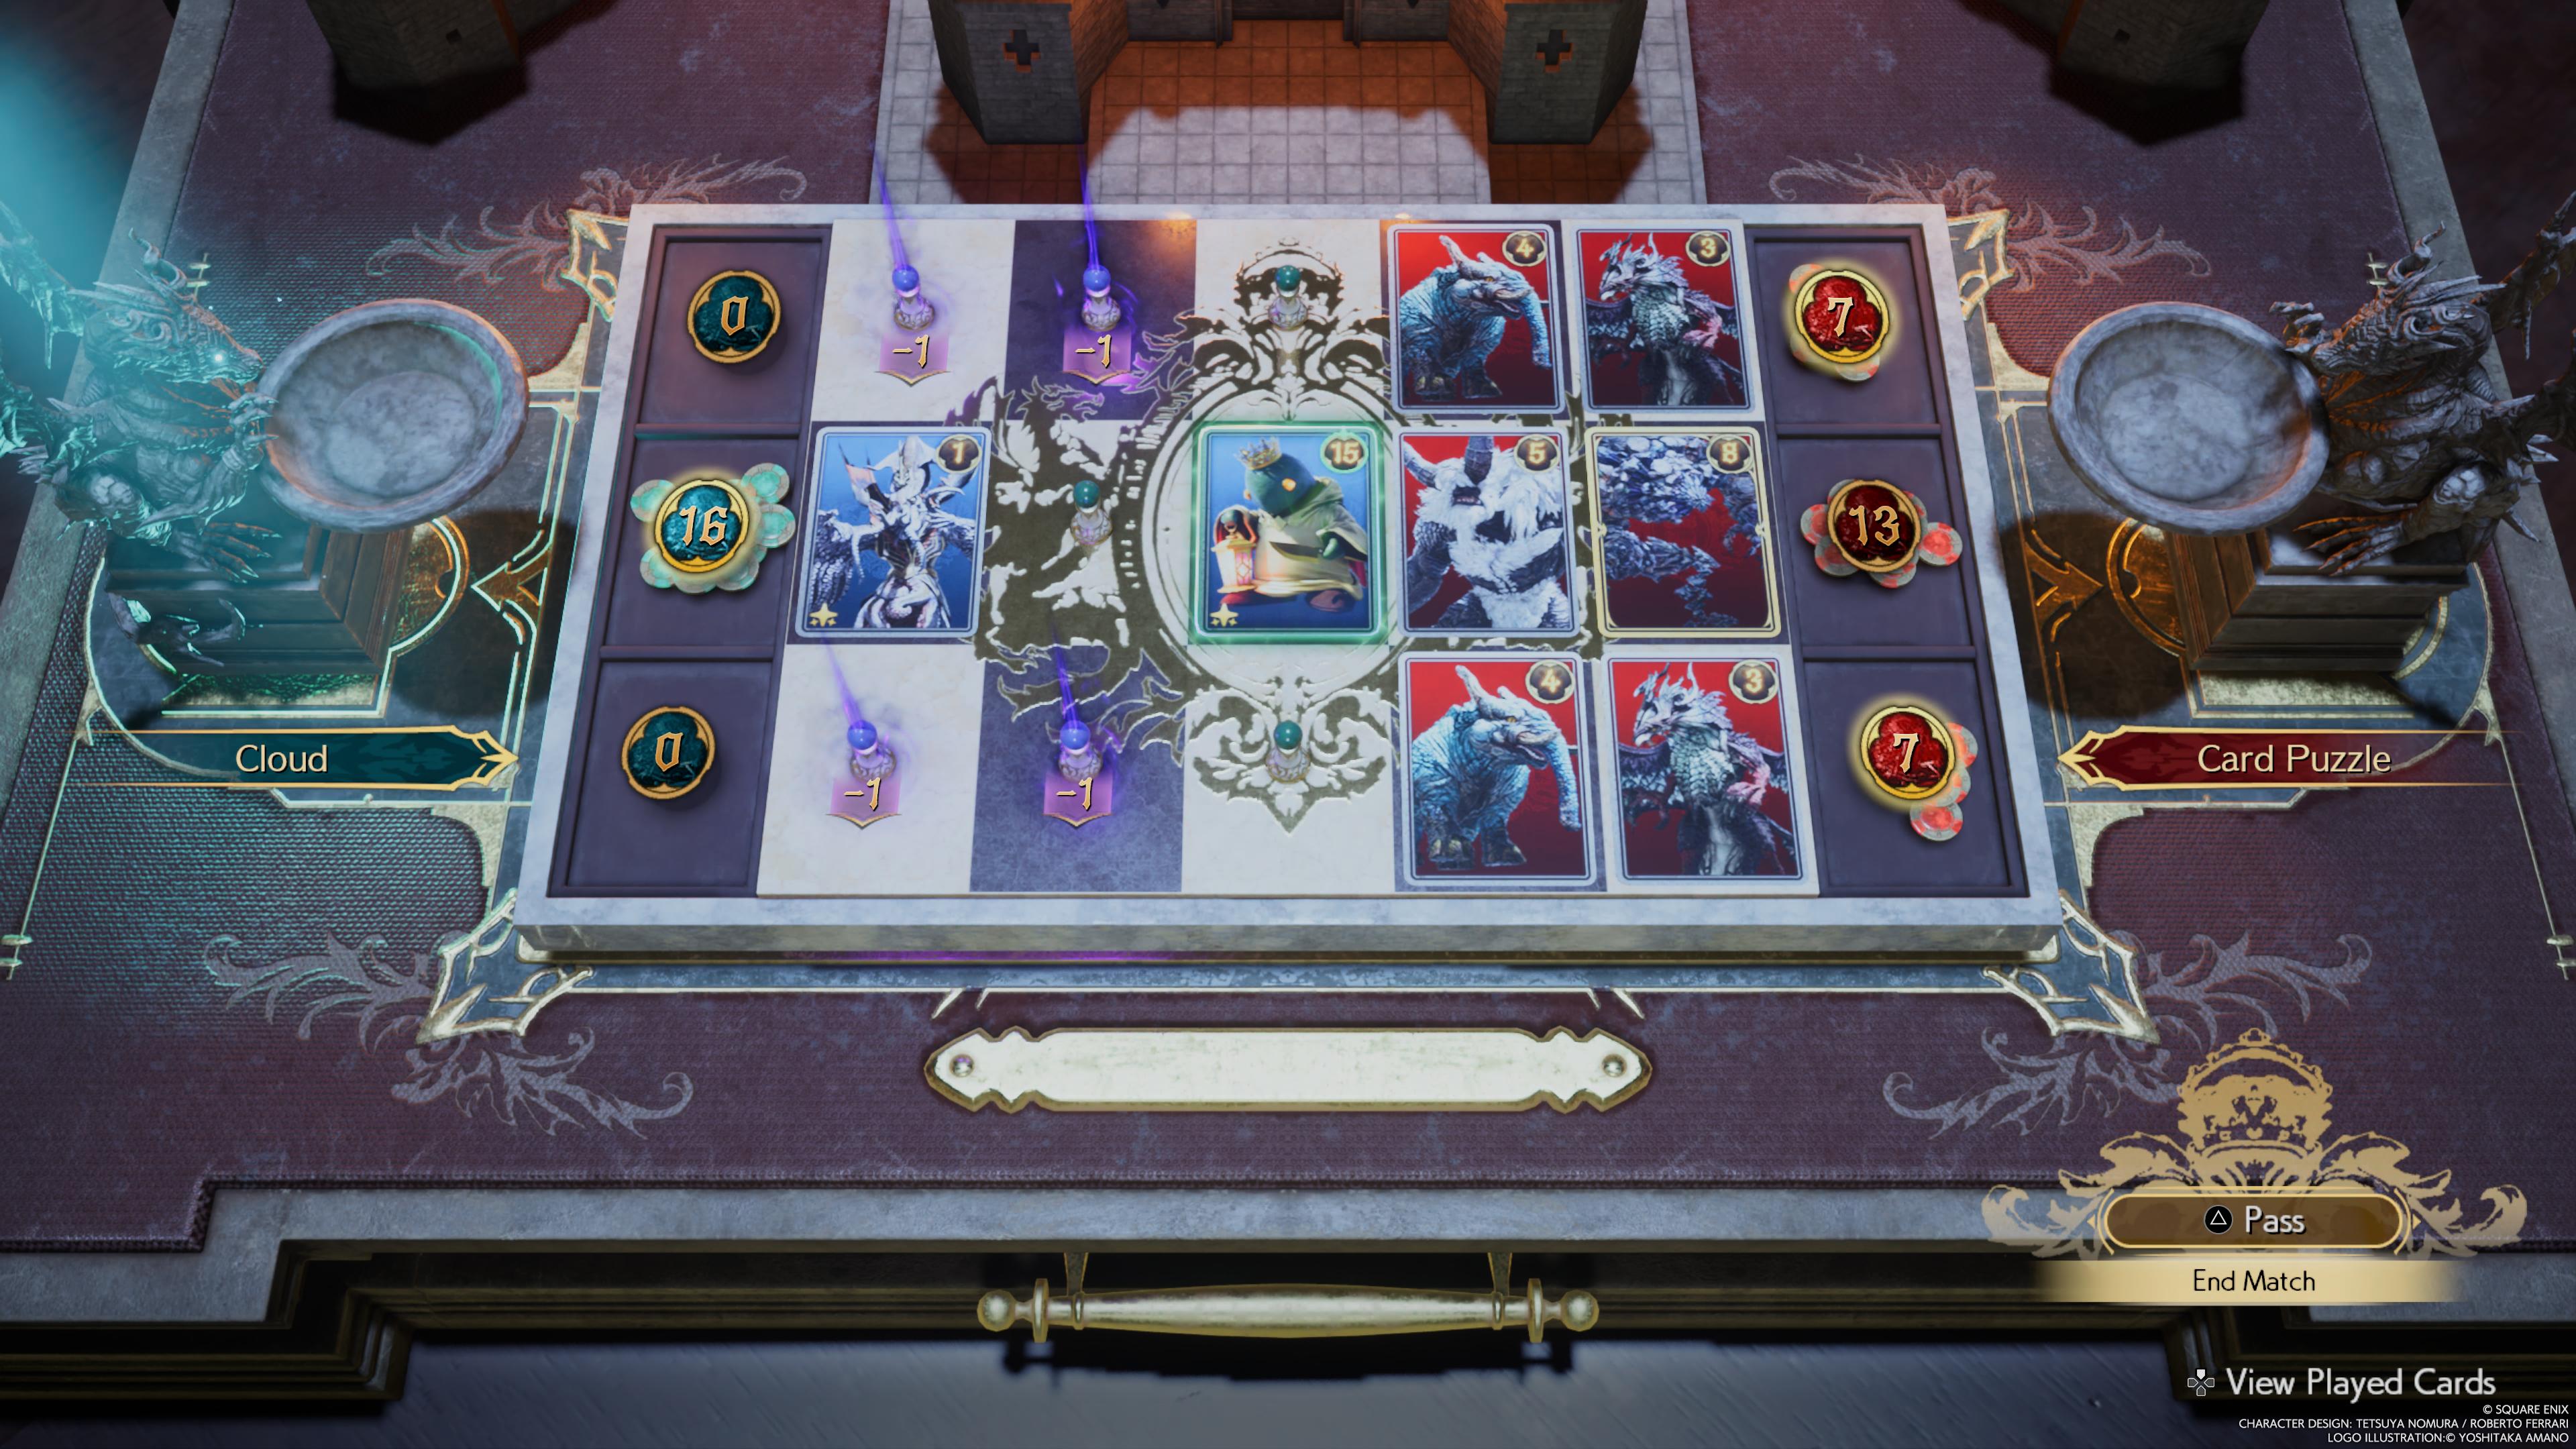 An image from Queen's Blood showing a puzzle in the game as part of a guide on how to play the card game.